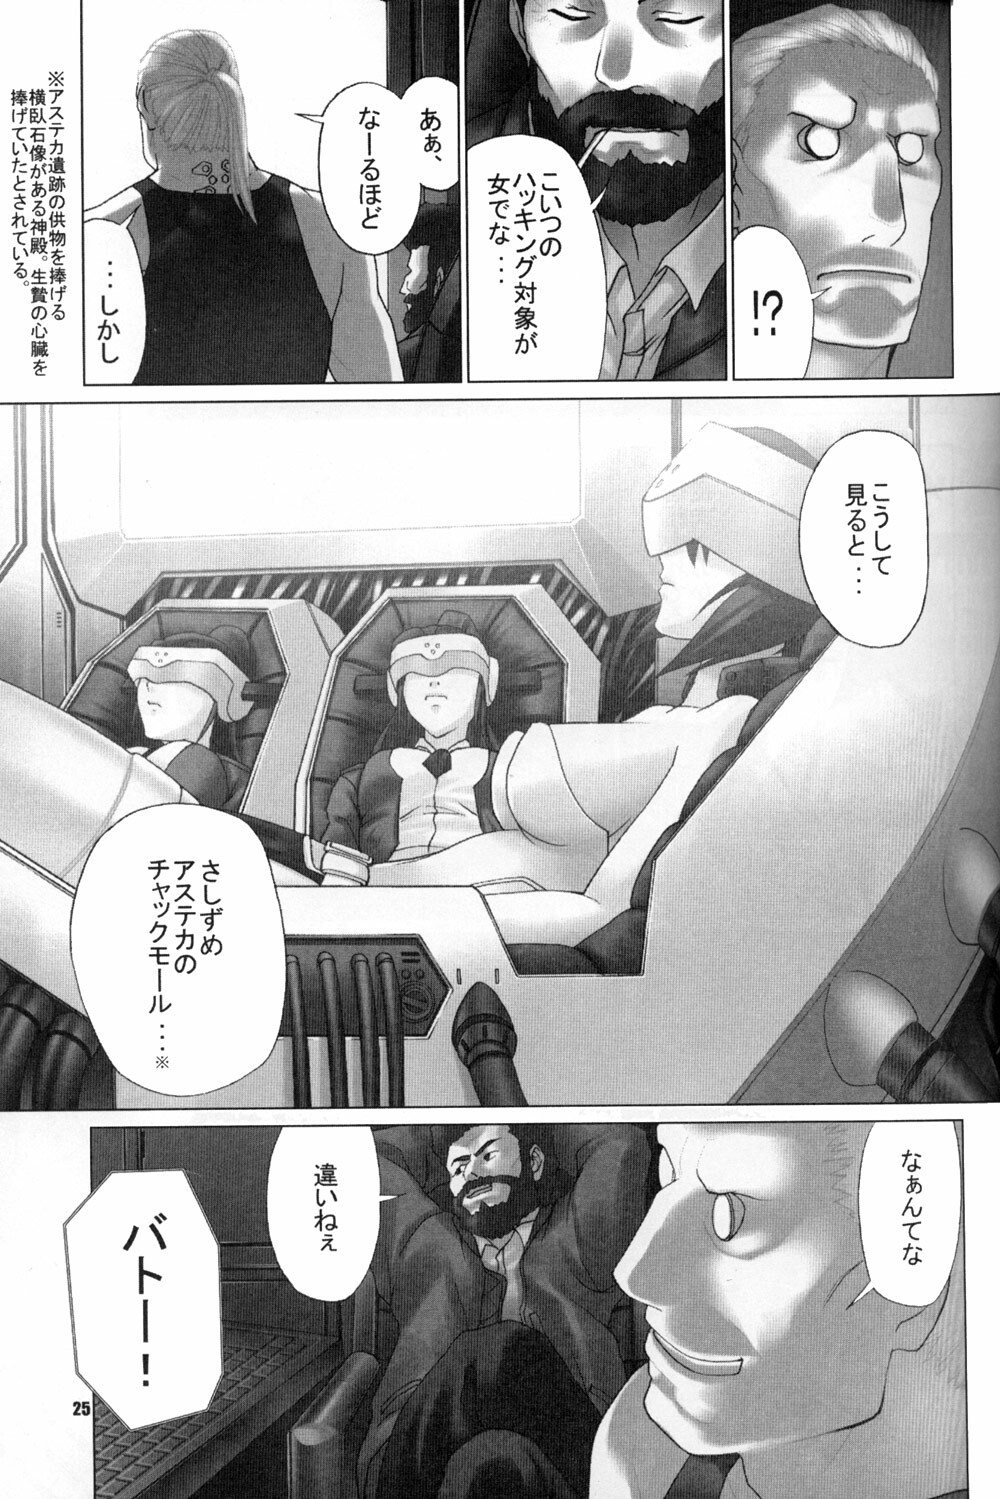 (C66) [Runners High (Chiba Toshirou)] CELLULOID - ACME (Ghost in the Shell) page 25 full